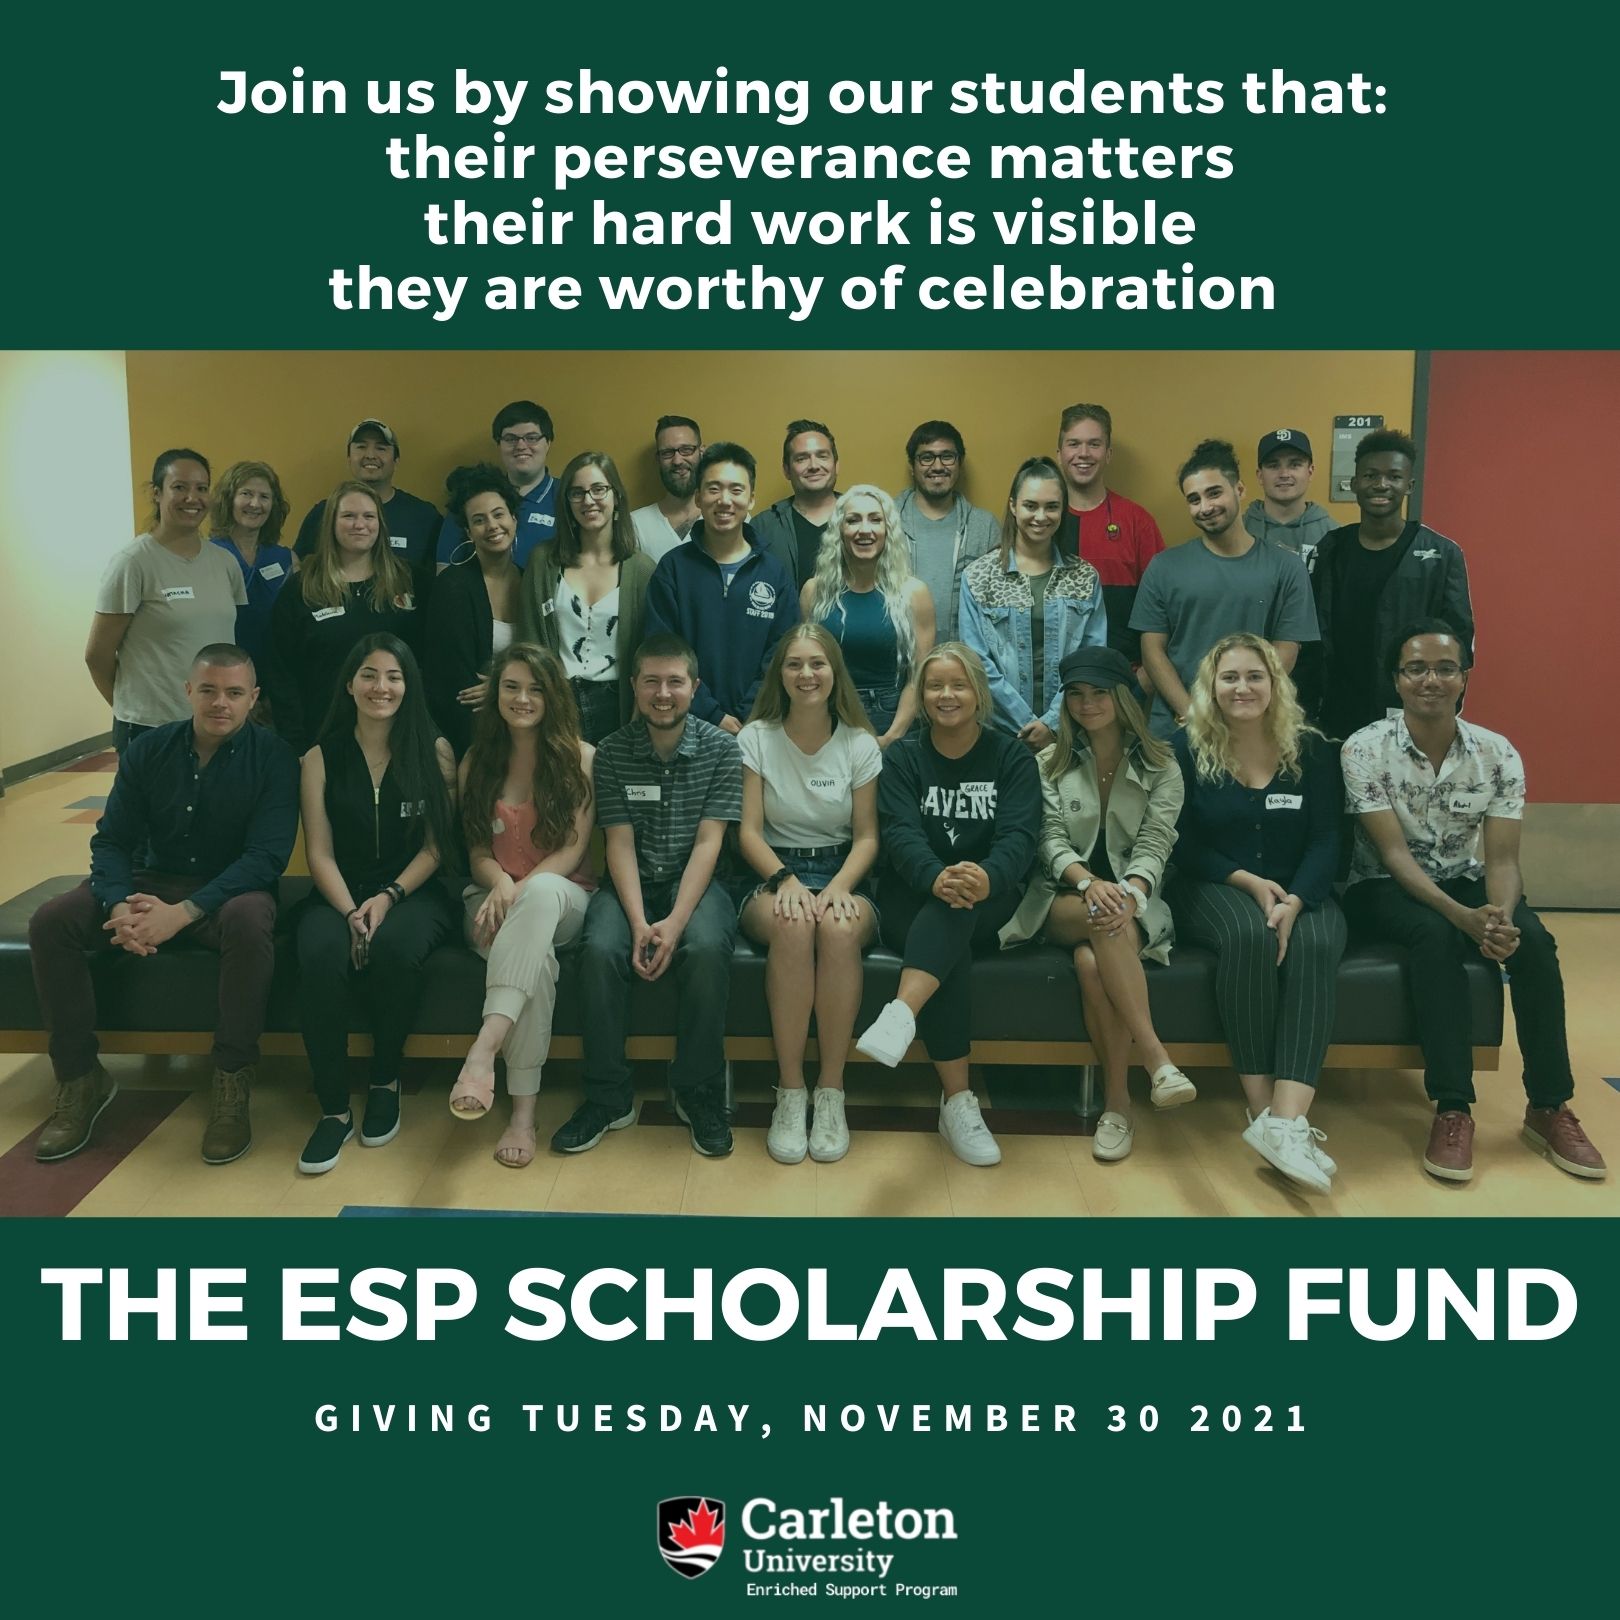 Join us by showing our students that: their perseverance matters, their hard work is visible, and they are worthy of celebration. ID: Picture shows a smiling group of former ESP students, many of whom were academic award recipients.